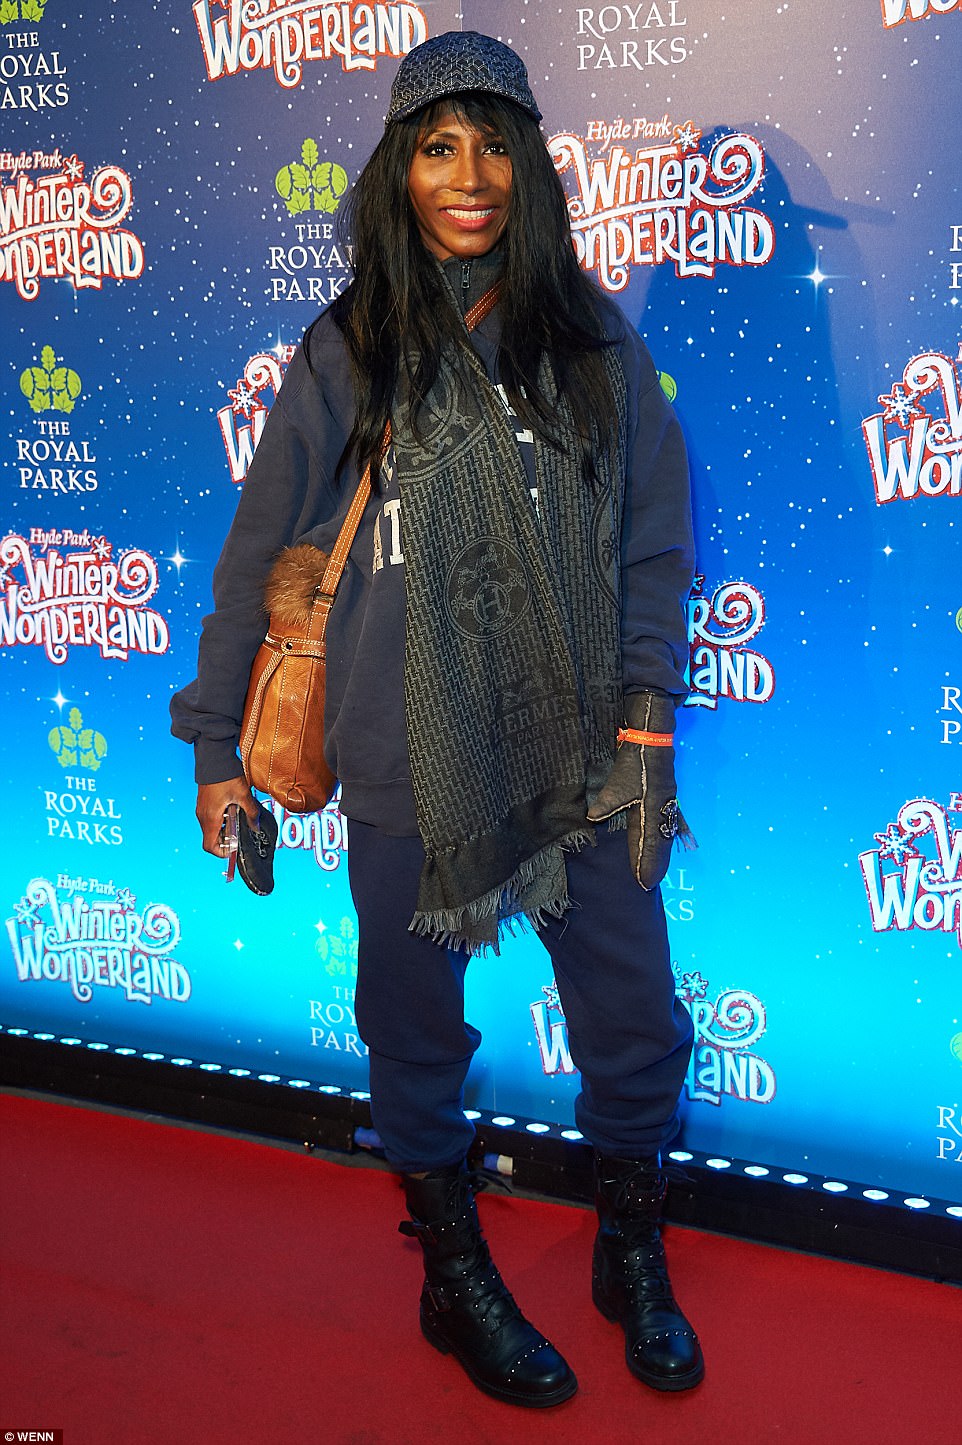 Stepping out: Sinitta was also in attendance at Winter Wonderland and no doubt enjoyed a reunion with Simon Cowell